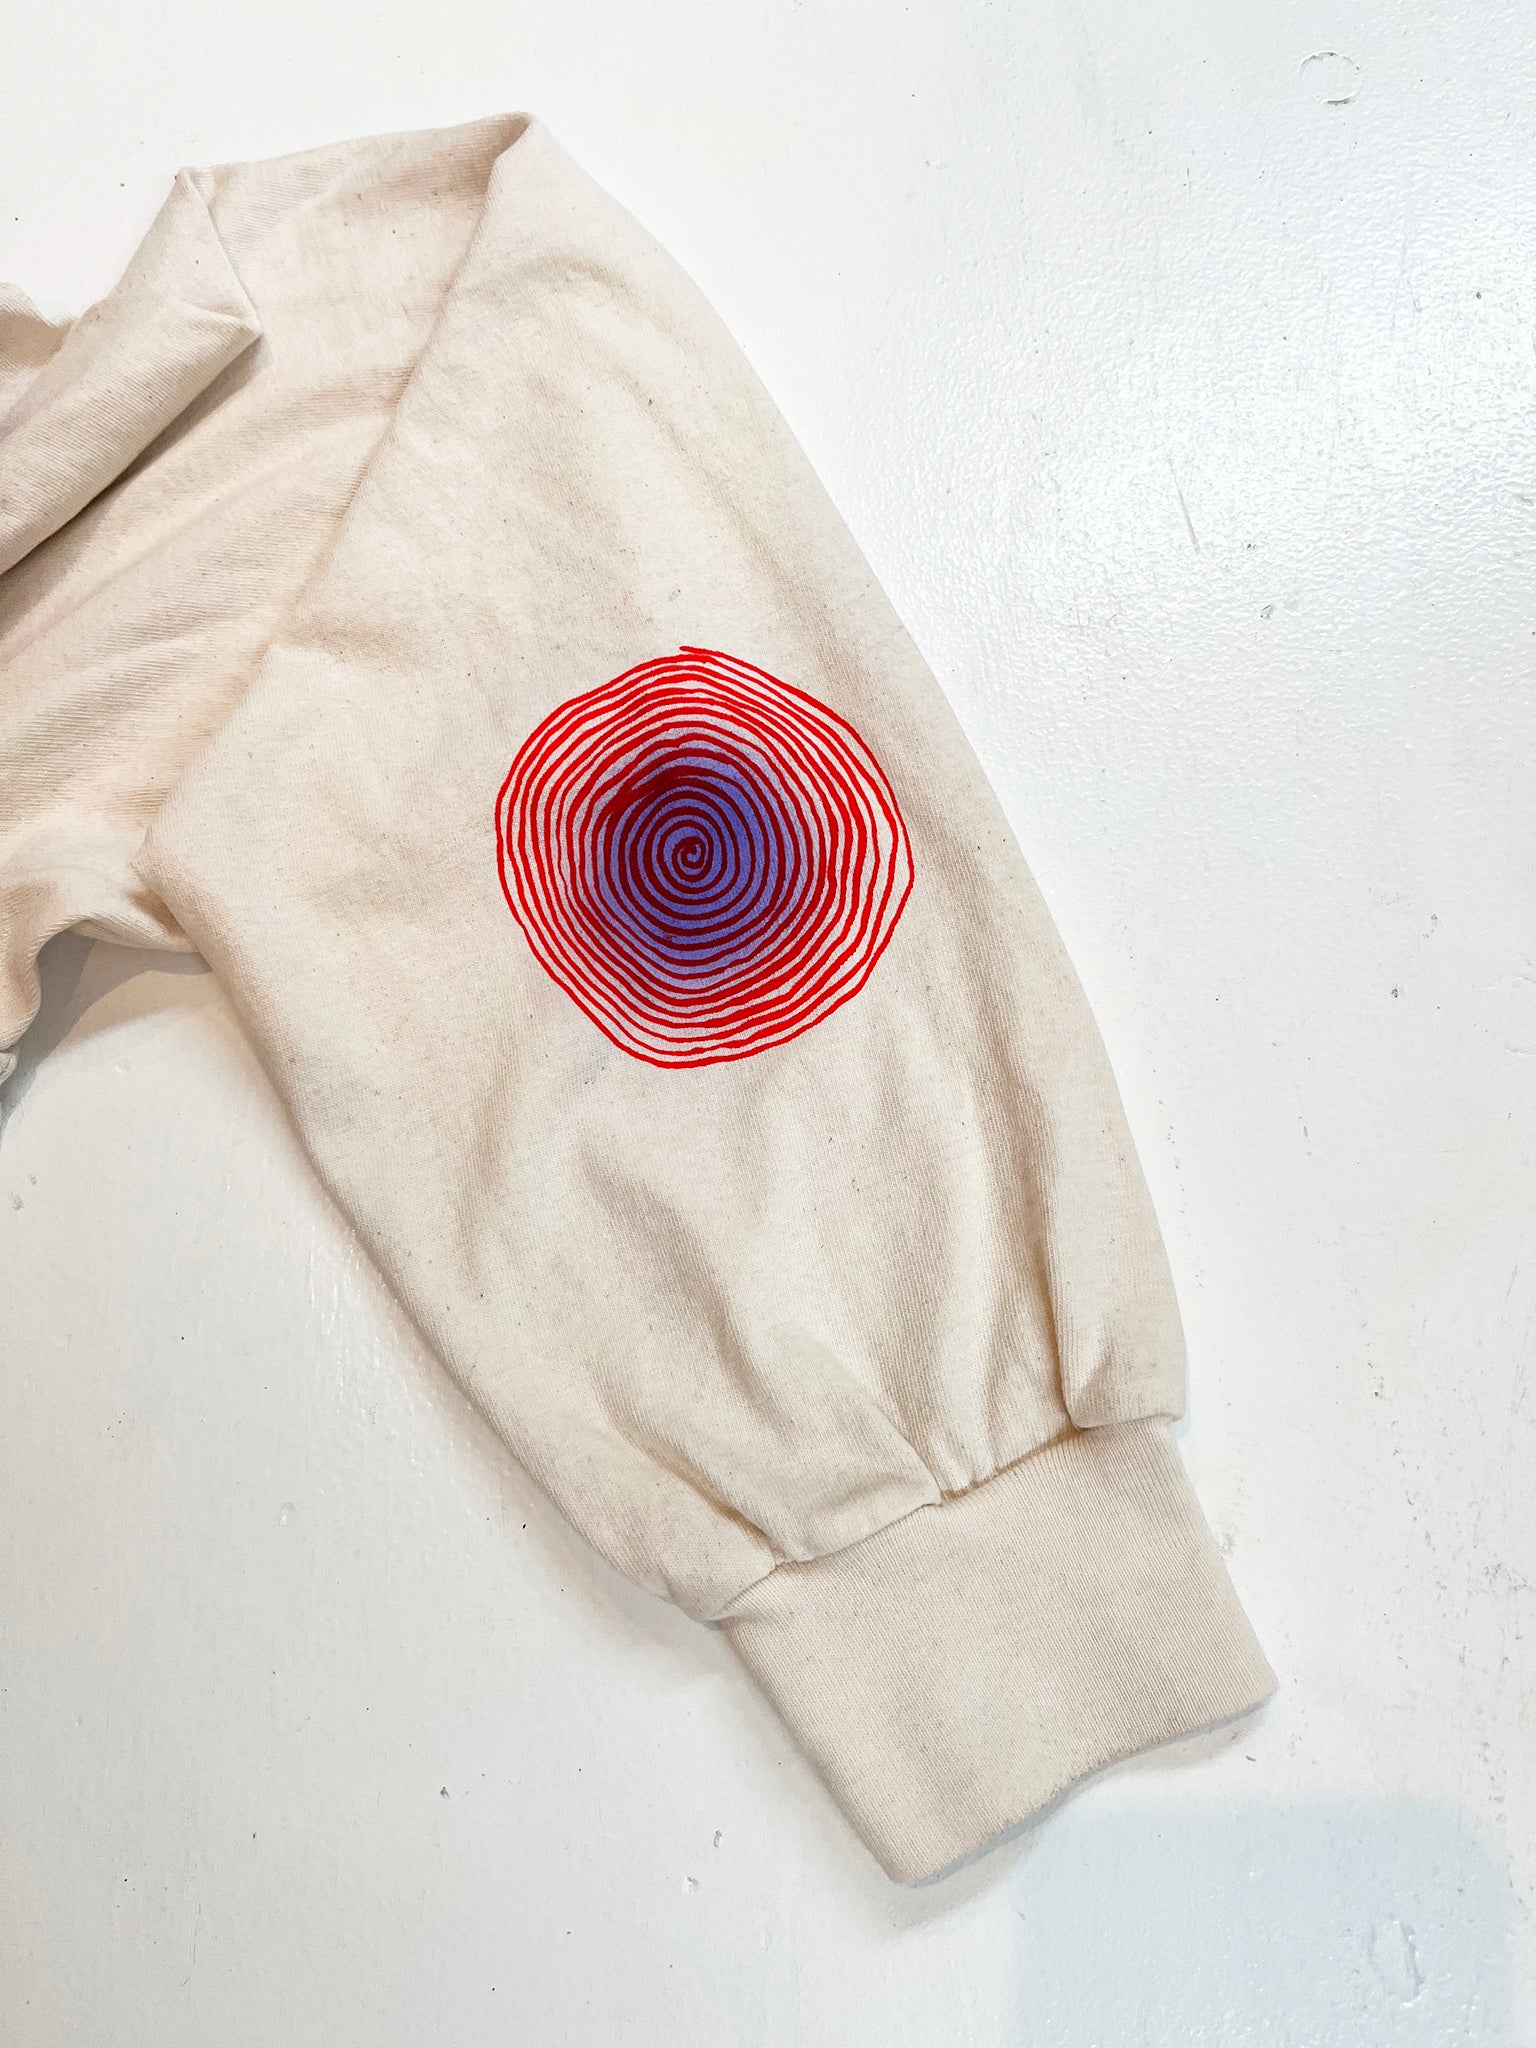 A photo detail of the opposite Maze Tee sleeve featuring a red spiral with a purple airbrushed haze at its center.